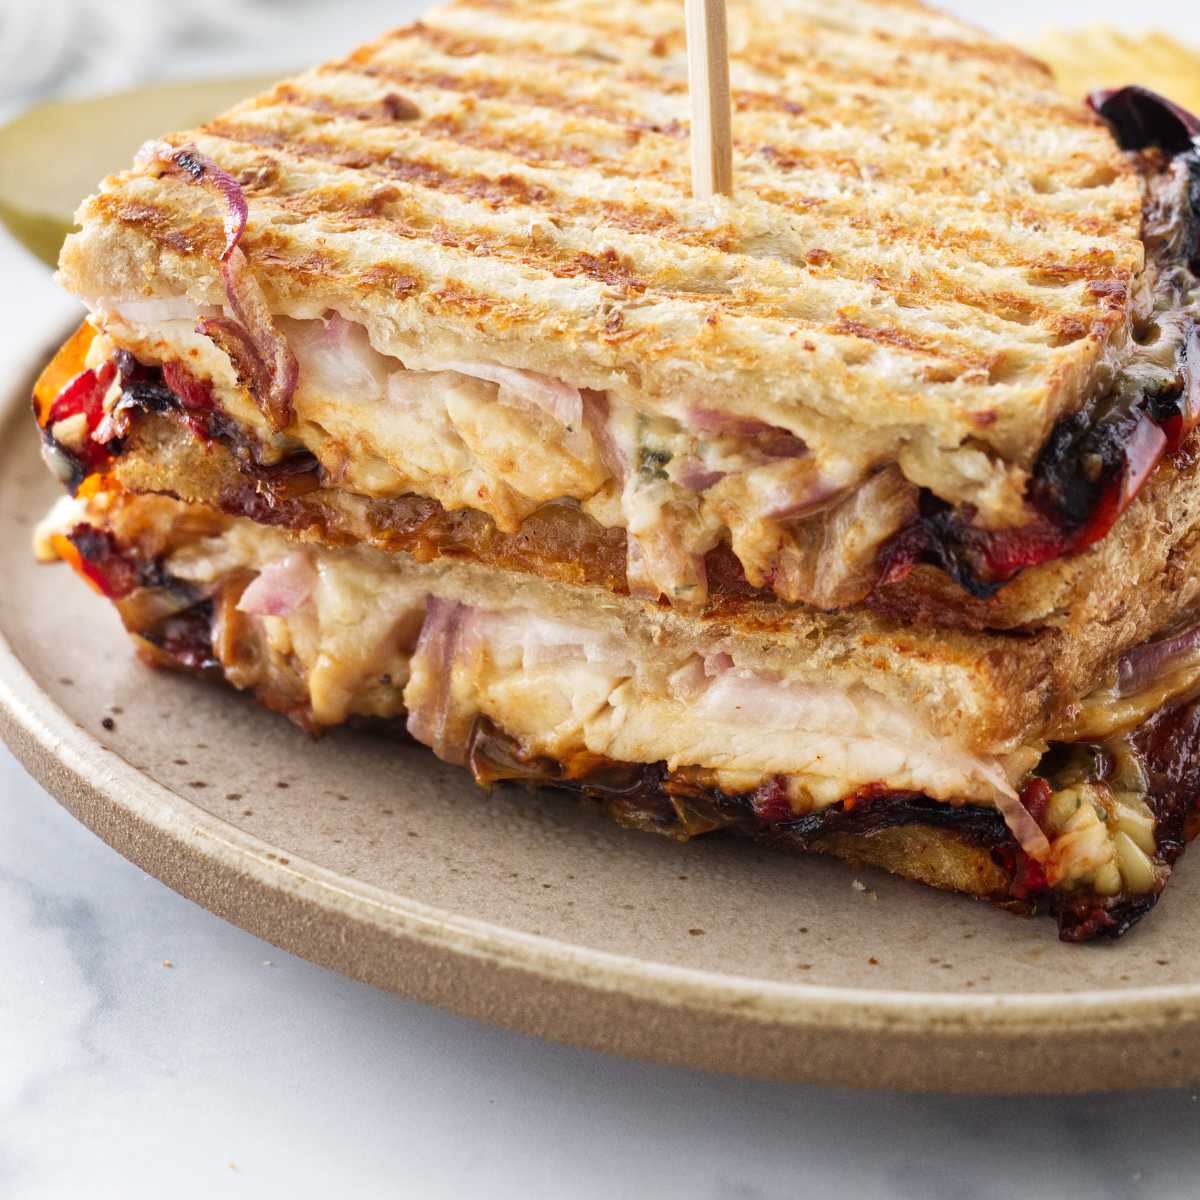 A panini sandwich cut in half and stacked on a plate with a wooden pick inserted in the